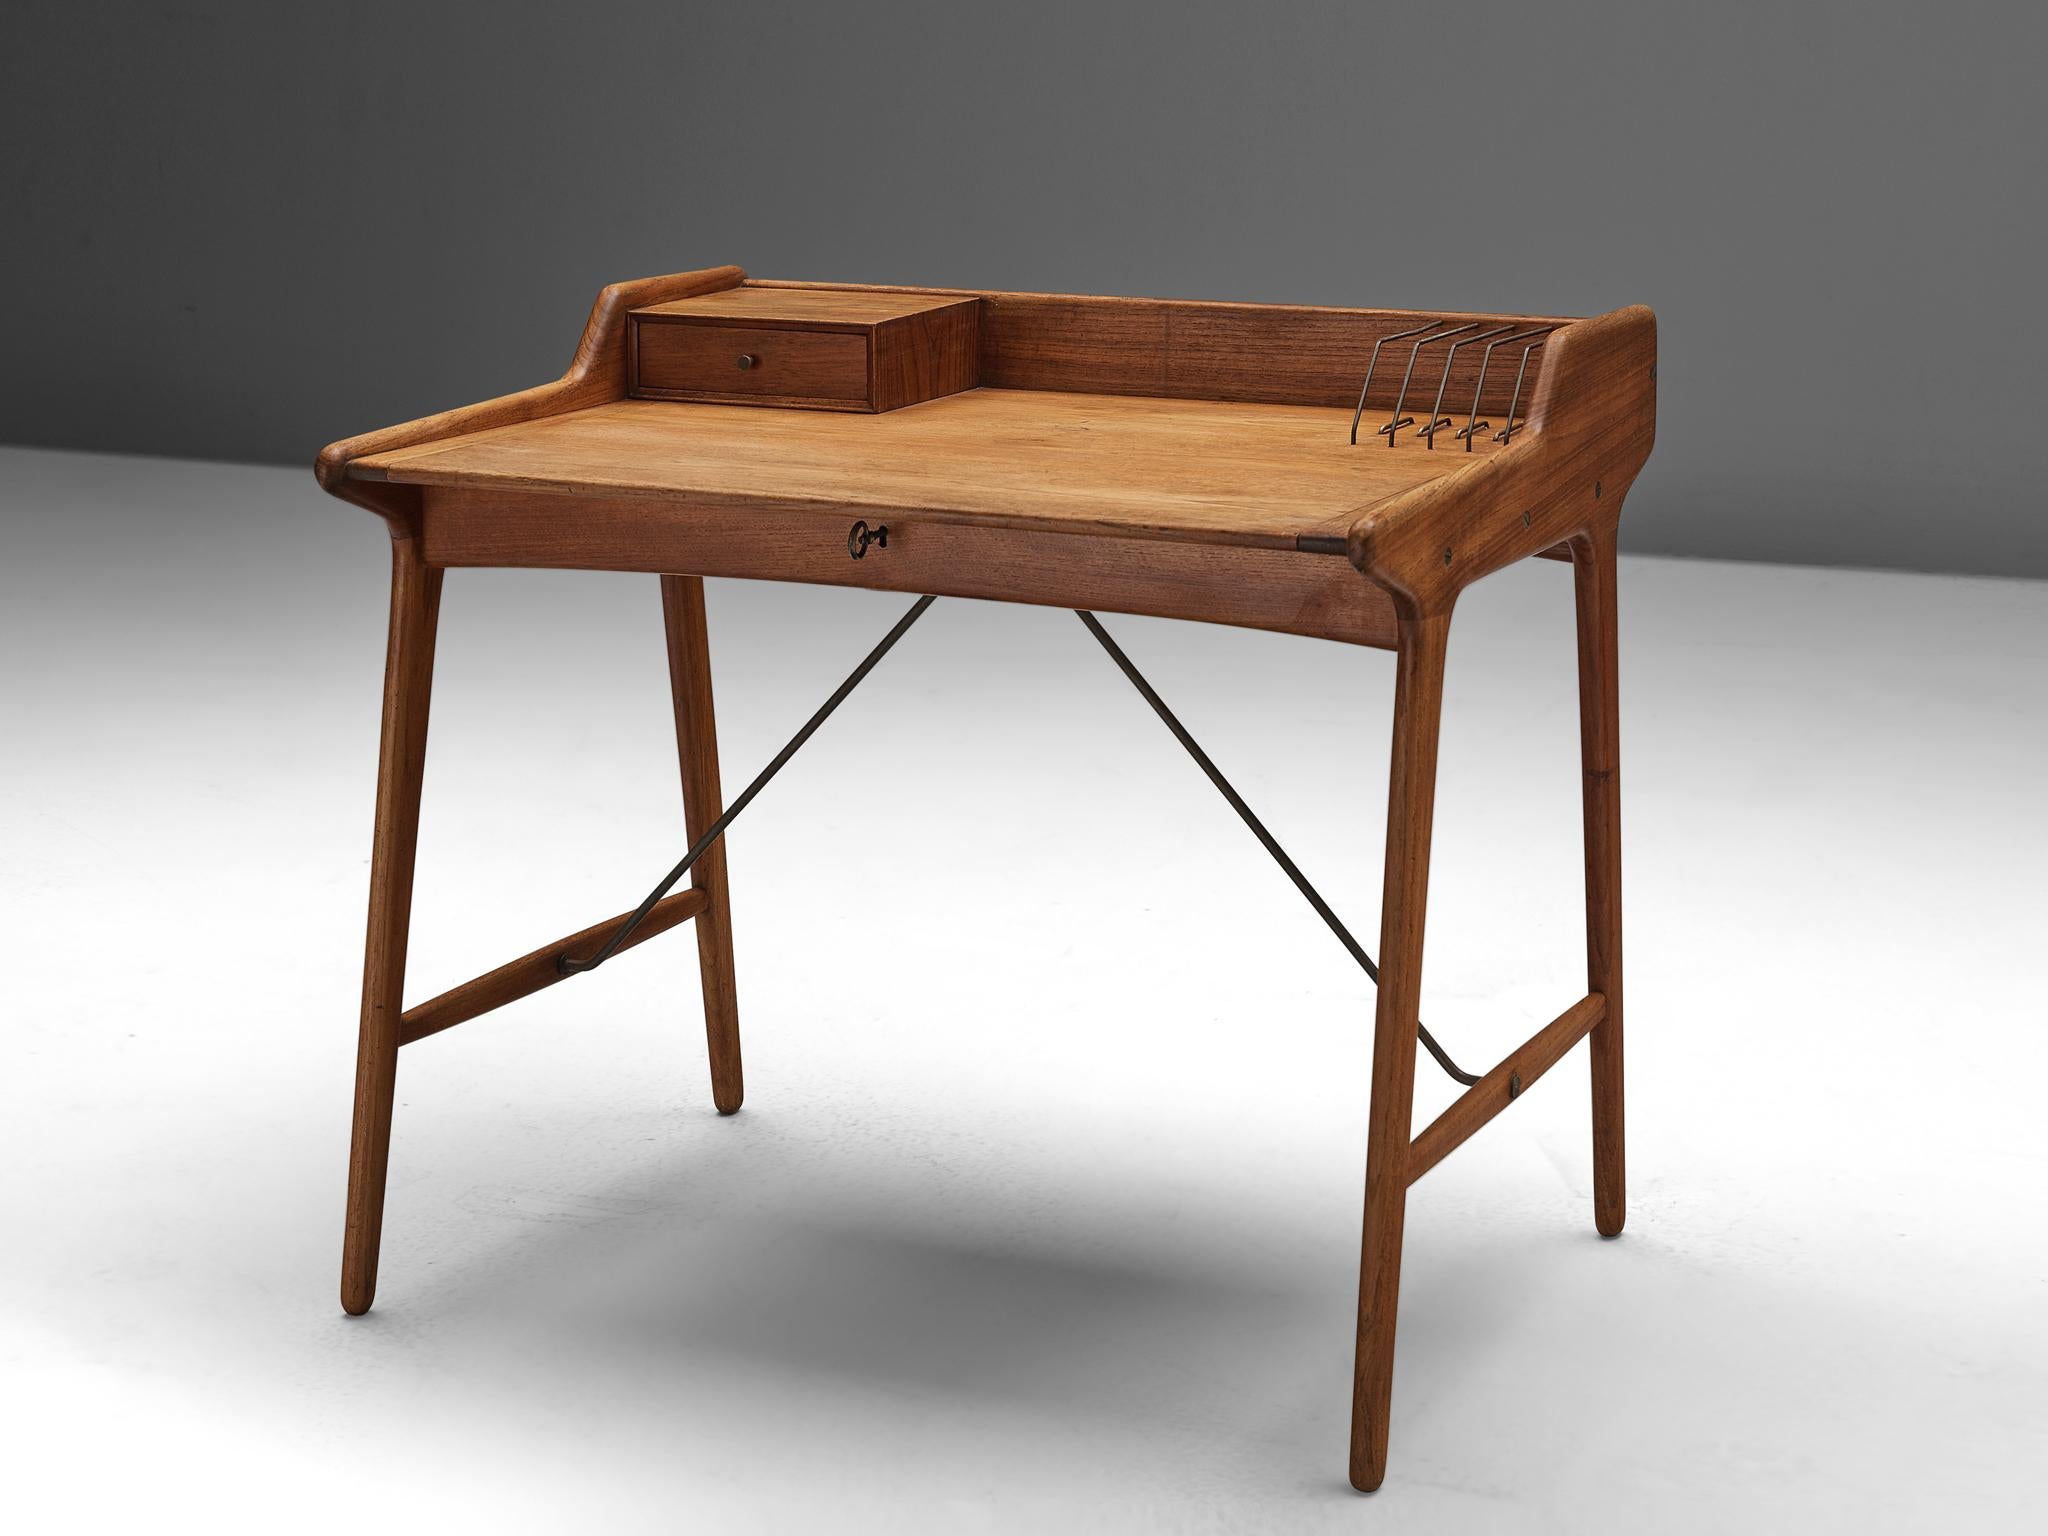 Svend Aage Madsen for K. Knudsen and Son, Desk, brass, teak, Denmark, 1950s.

This refined writing desk is designed by Svend Aage Madsen in the 1950s. The arching top holds a small drawer, and a couple of brass document-holders. Nice and functional